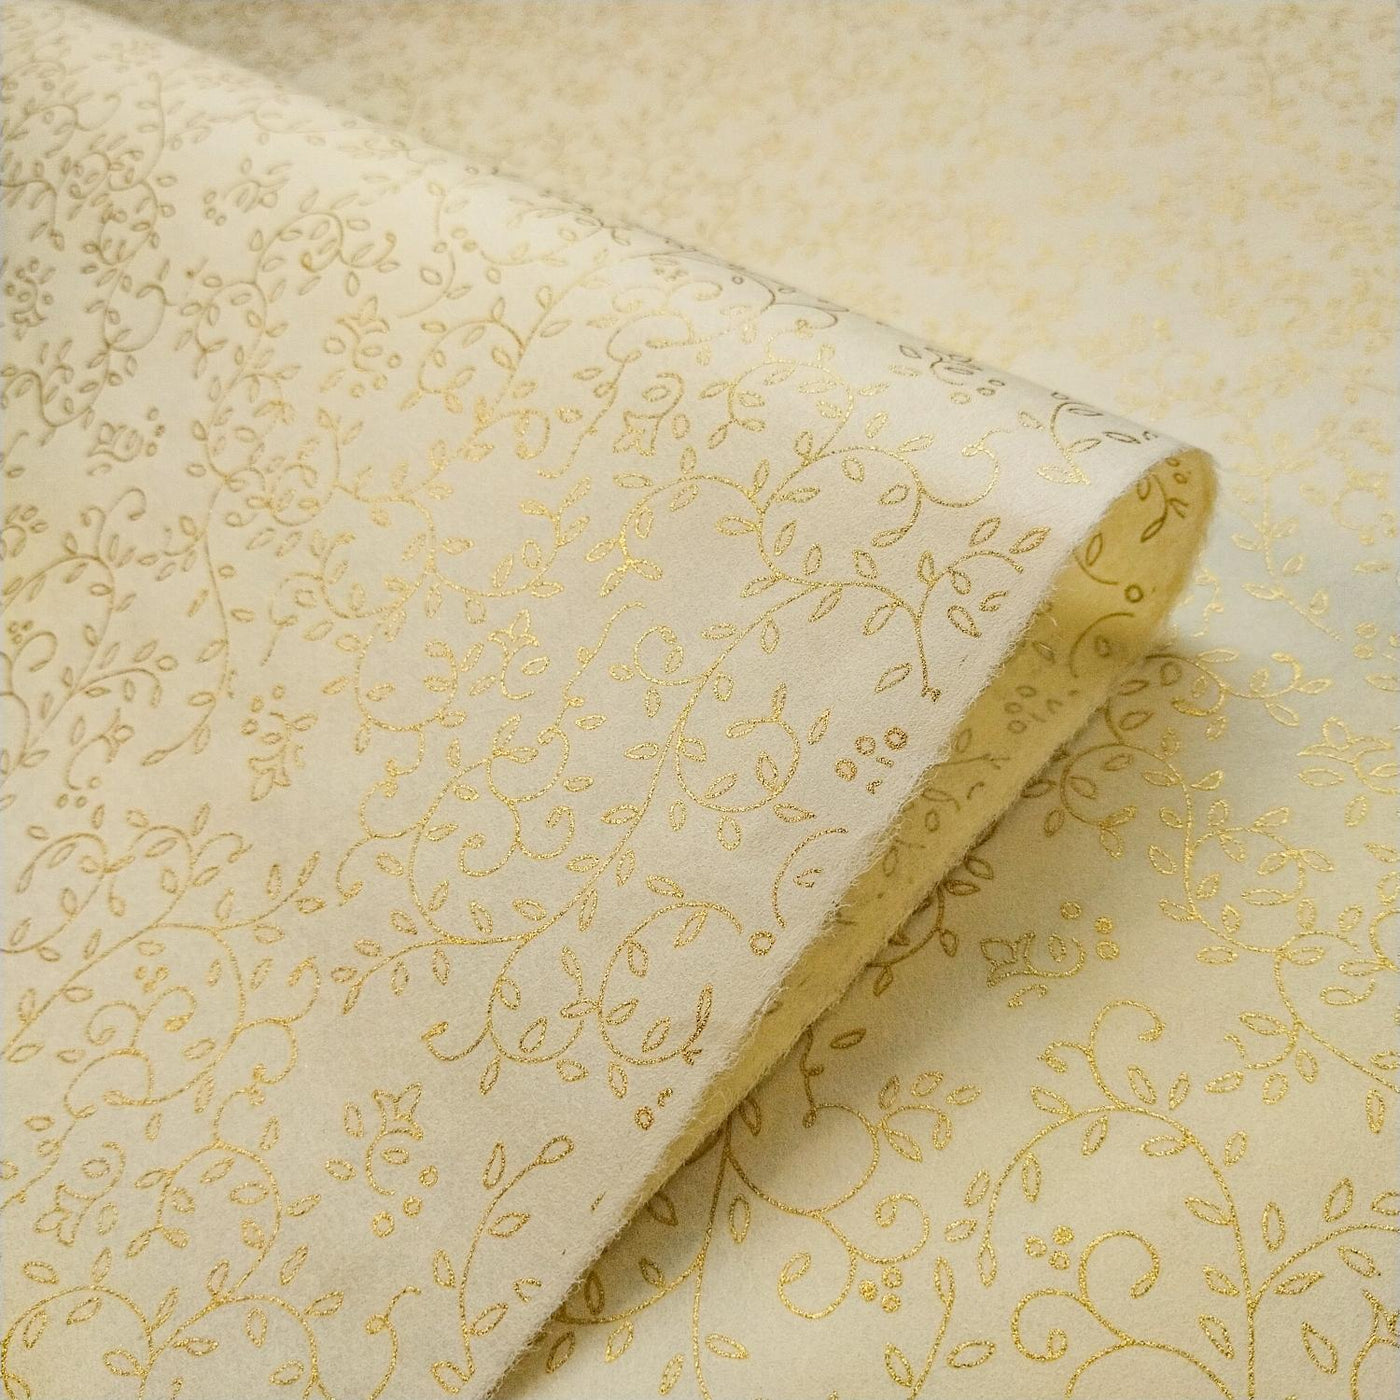 Grapevine Screen-printed Kozo Mulberry Paper Ivory